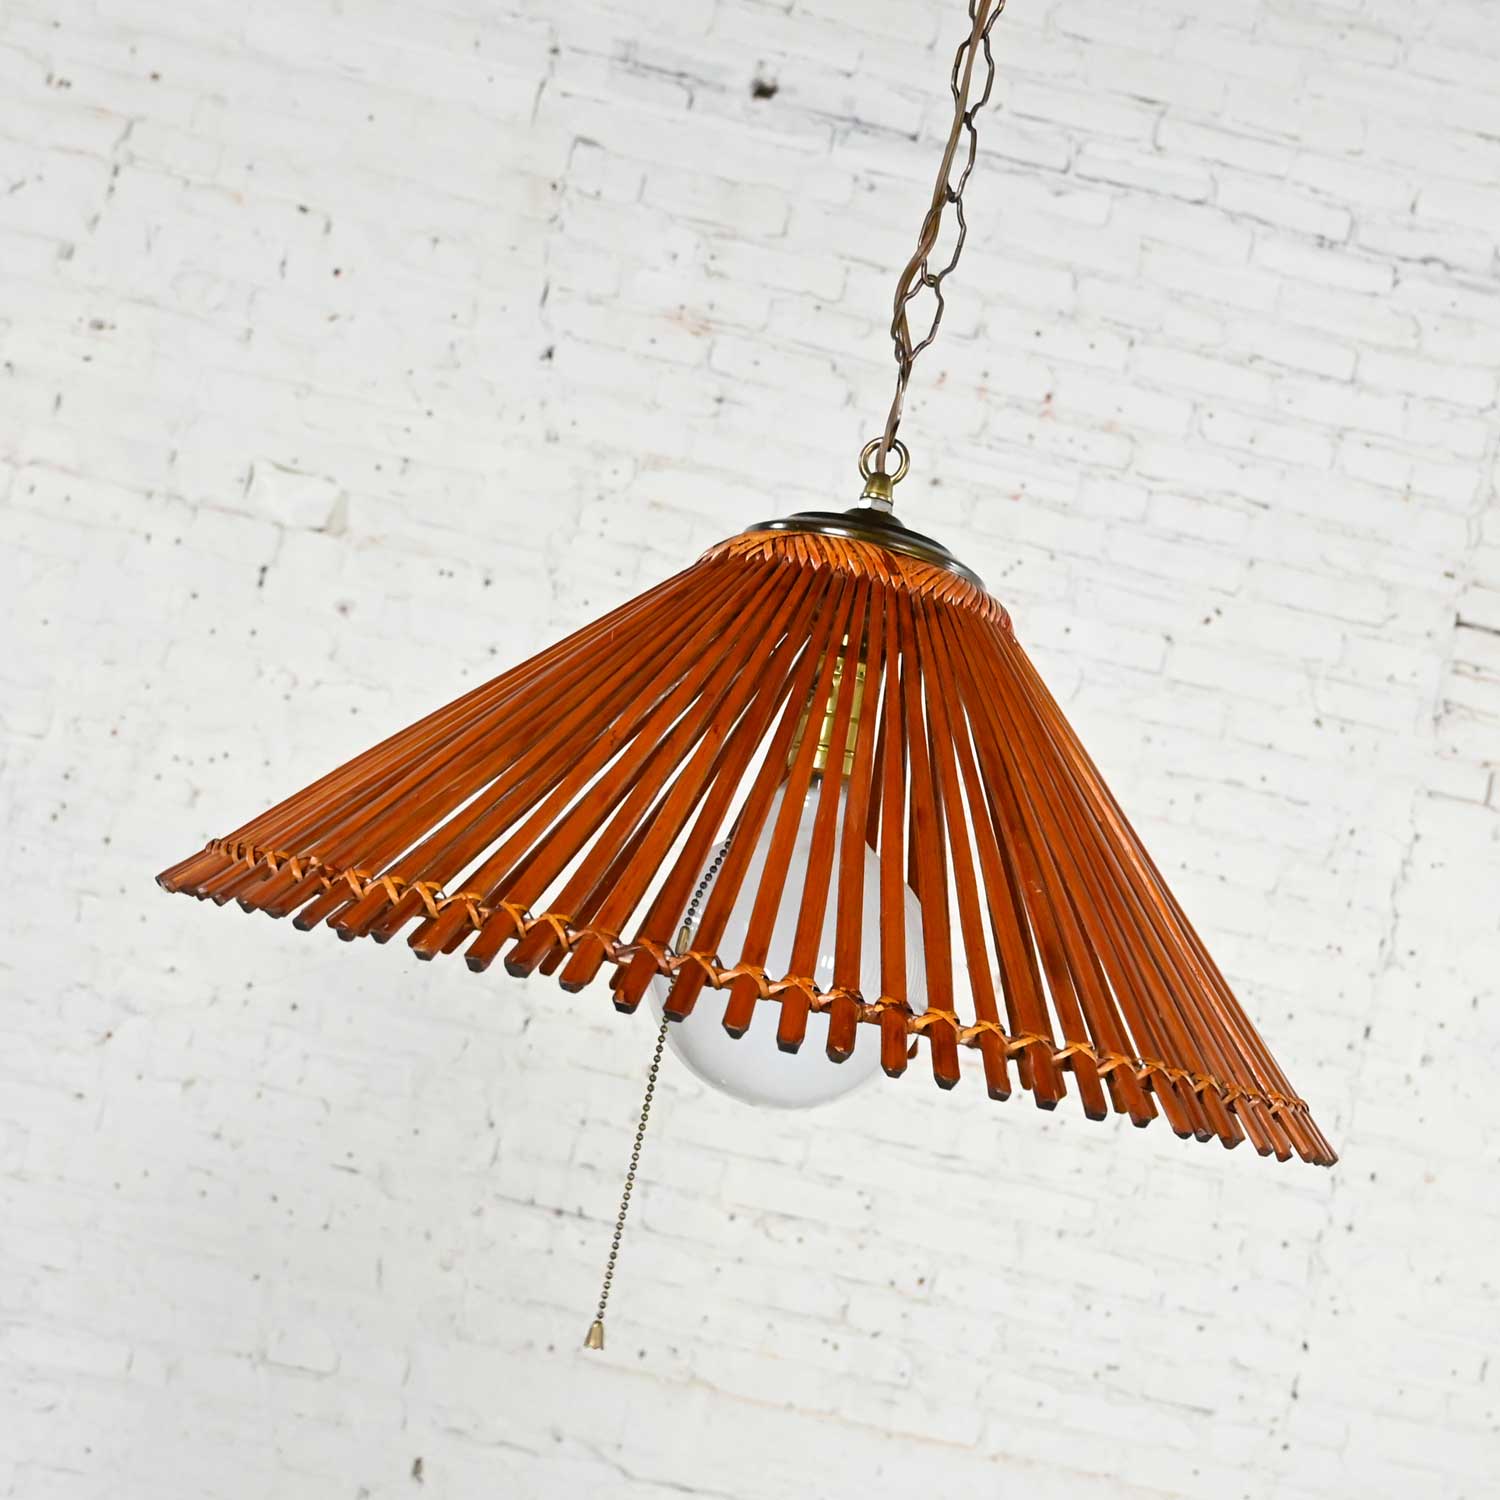 Vintage Mid-Century Modern Split Rattan Conical Hanging Swag Light Antiqued Brass Accents